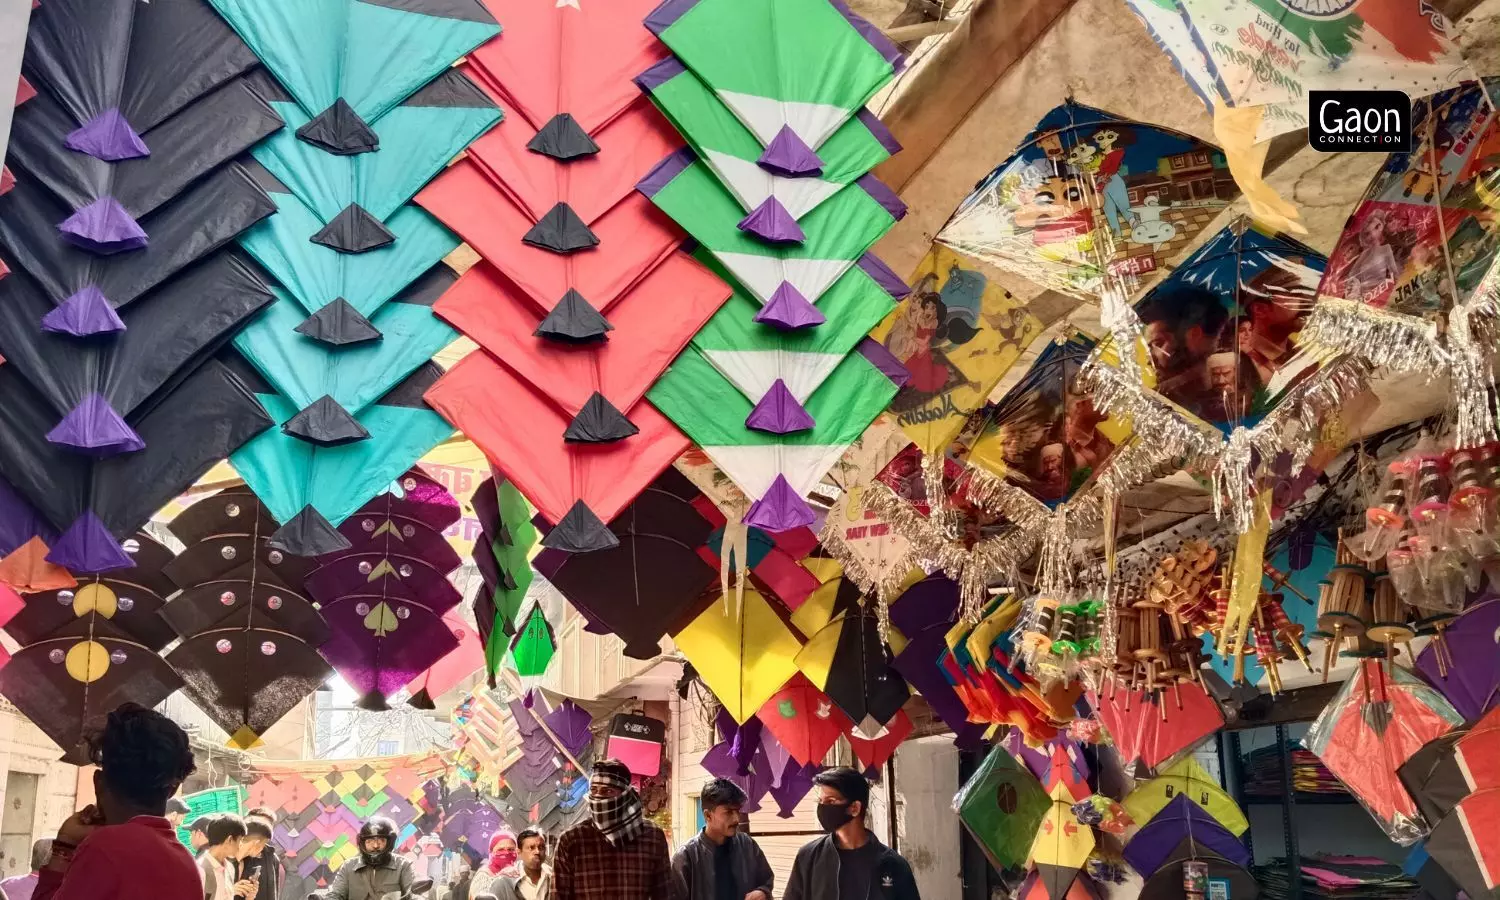 Kites are usually prepared from August to December and sold from January to March when different festivals are celebrated across India.